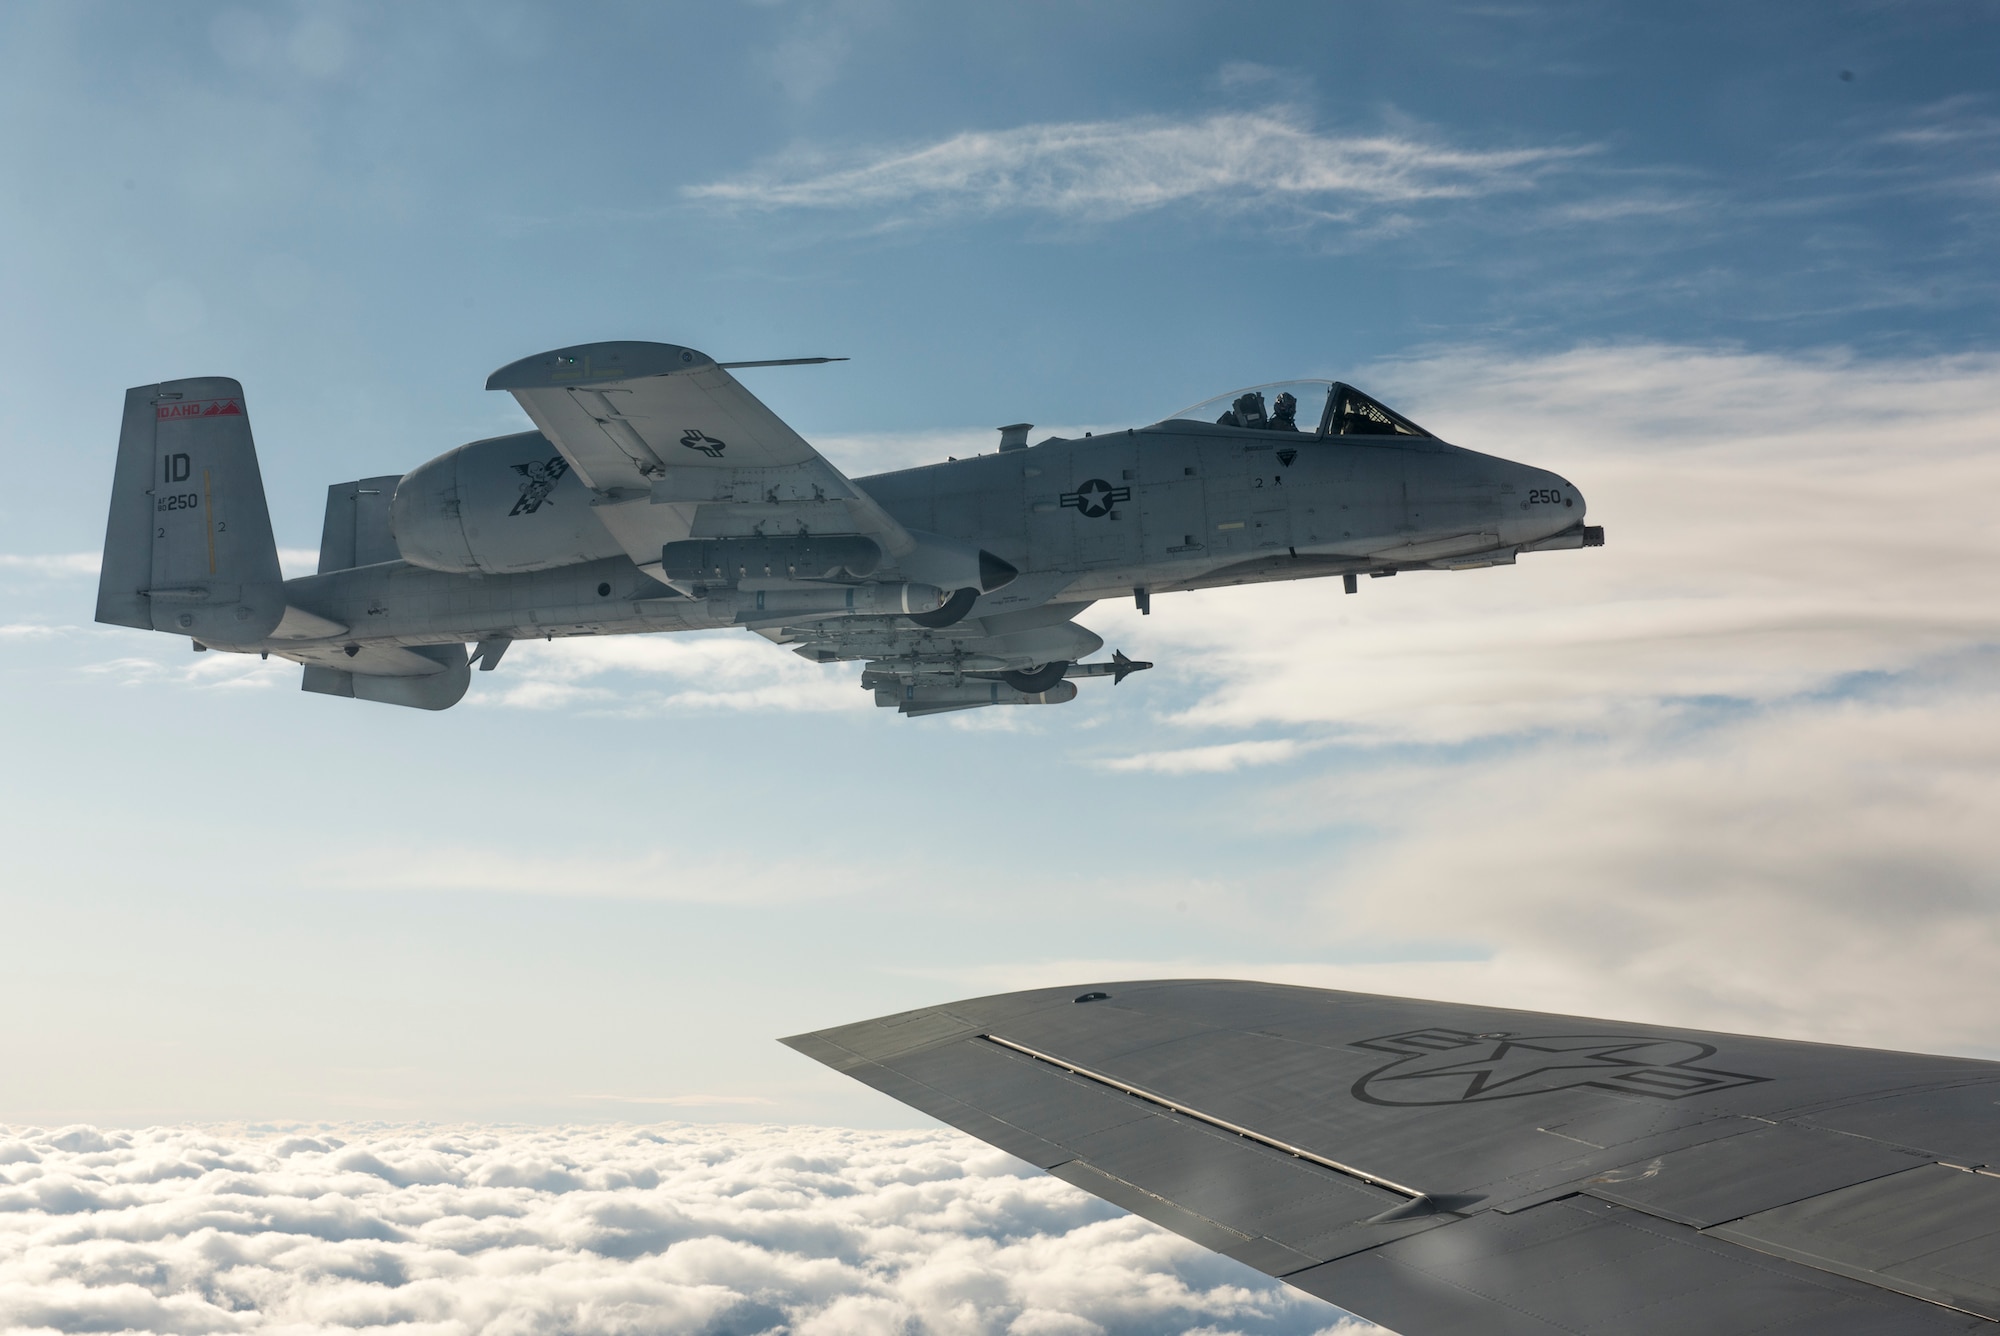 An A-10 Thunderbolt || assigned to the 190th Fighter Squadron flies next to a KC-135 Stratotanker assigned to the Utah Air National Guard’s 151st Air Refueling Wing, over Southwest Idaho, Dec. 7, 2019. The Idaho and Utah Air National Guard units collaborated to support an in-flight refueling experience for spouses of Airmen from the 124th Fighter Wing. (U.S. Air National Guard photo by Airman 1st Class Taylor Walker)